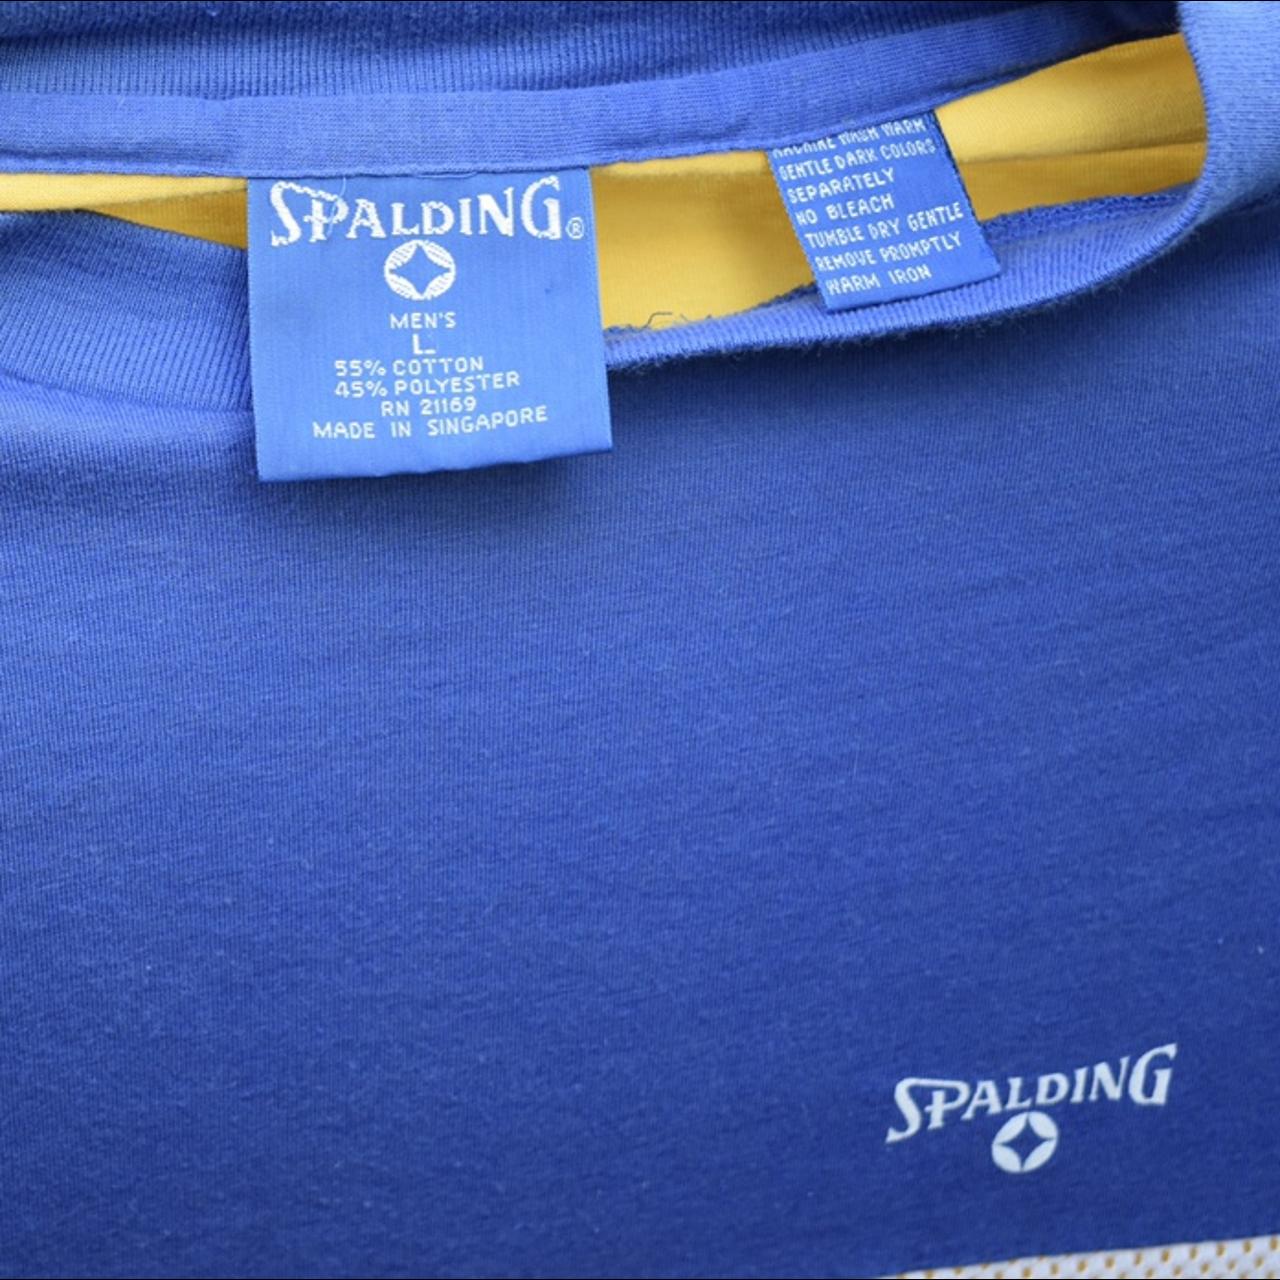 Spalding Men's Yellow and Blue T-shirt (4)